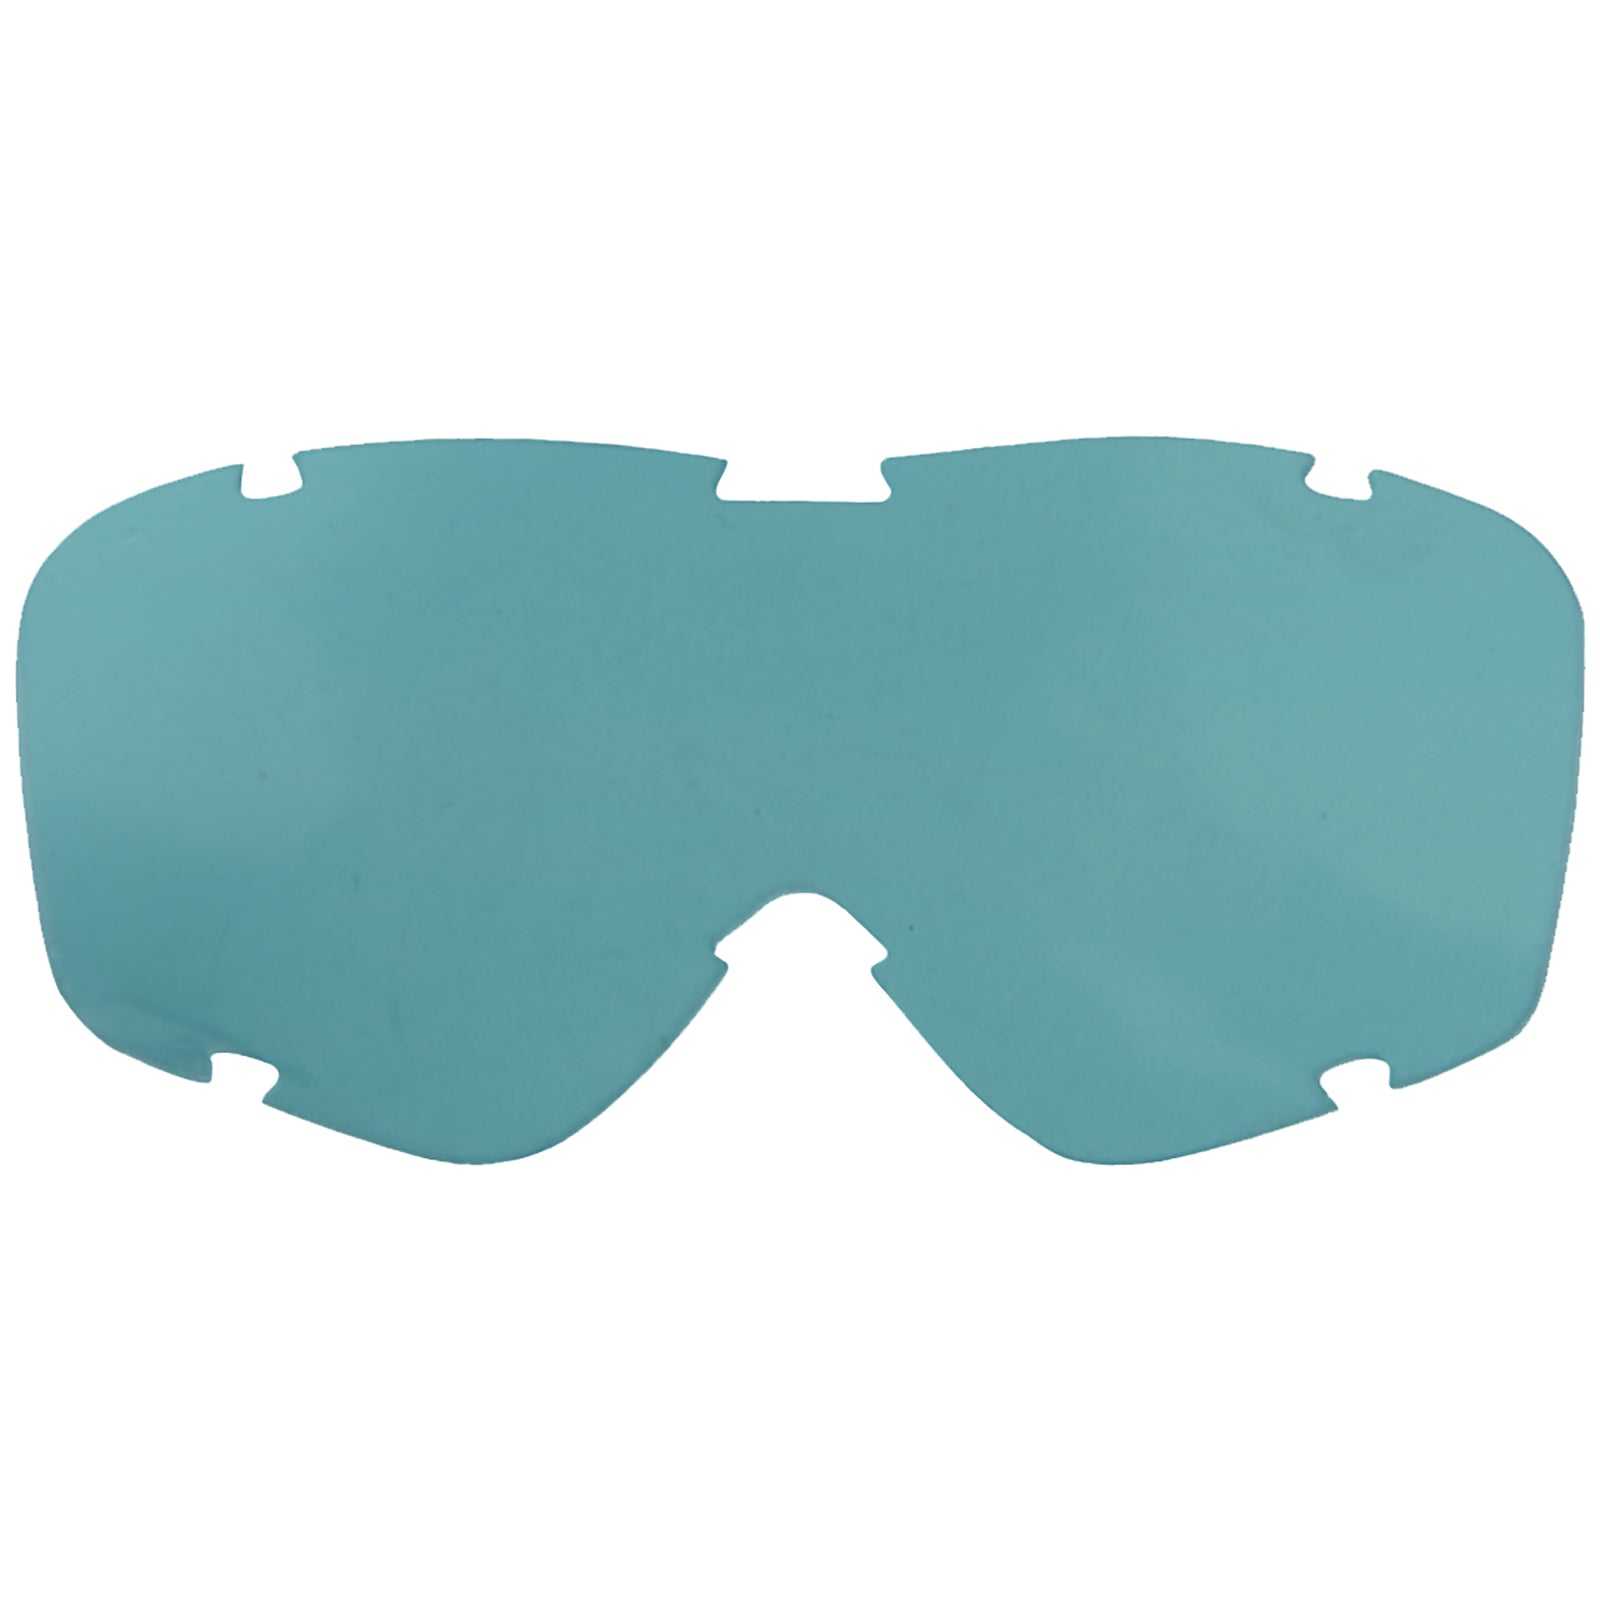 Oxford, Oxford Assault Mask Replacement Lens - Clear